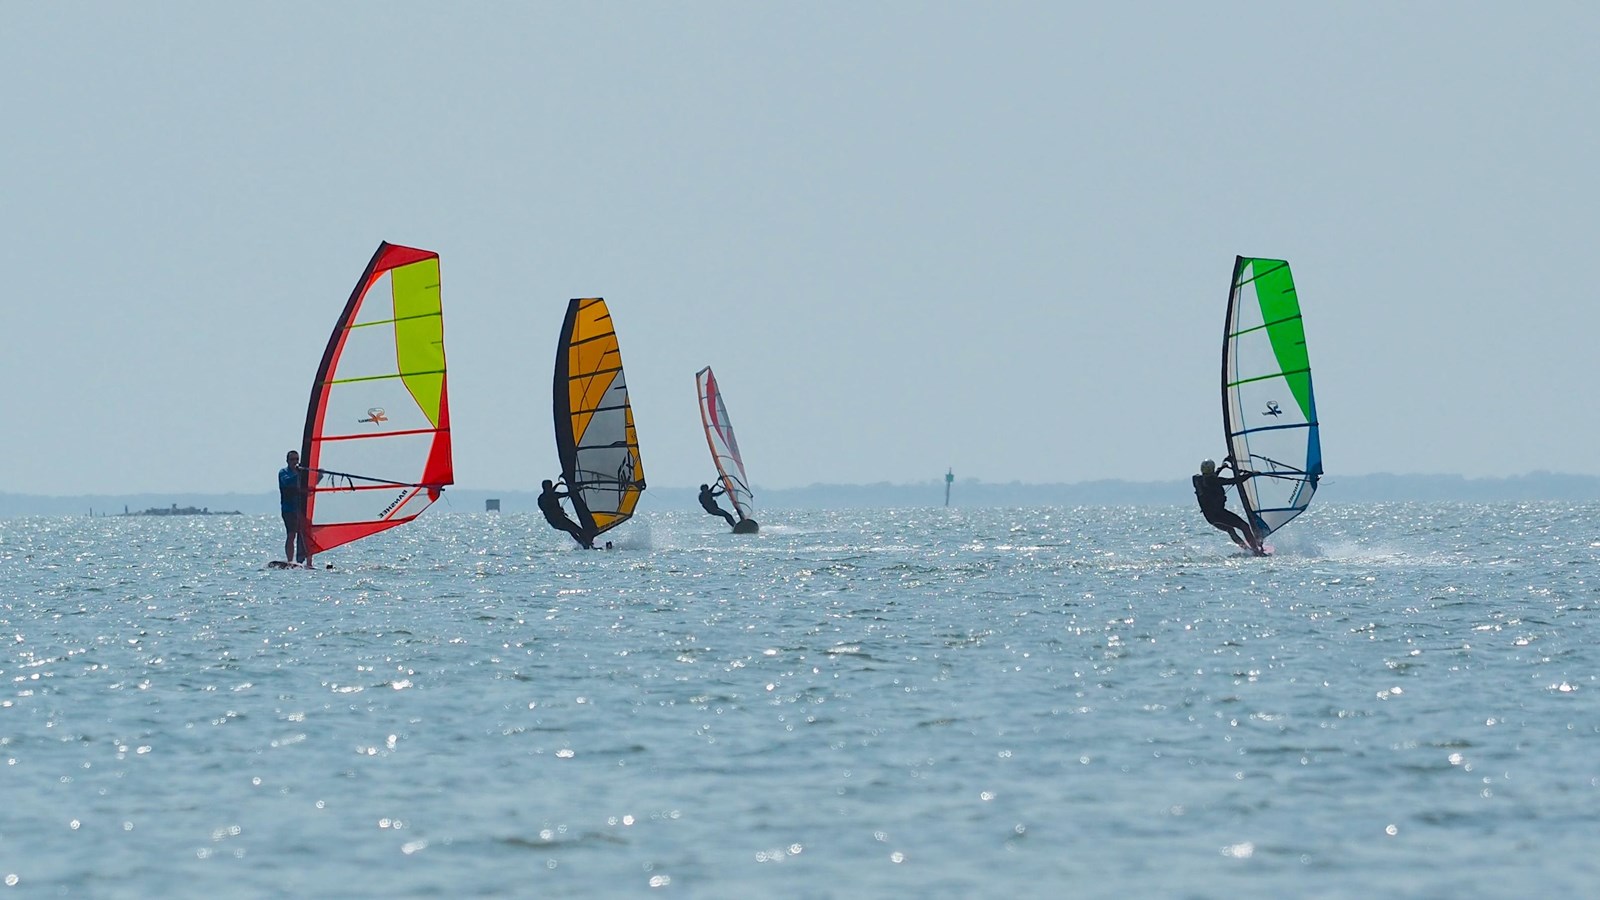 Several people windsurf on a large body of water.